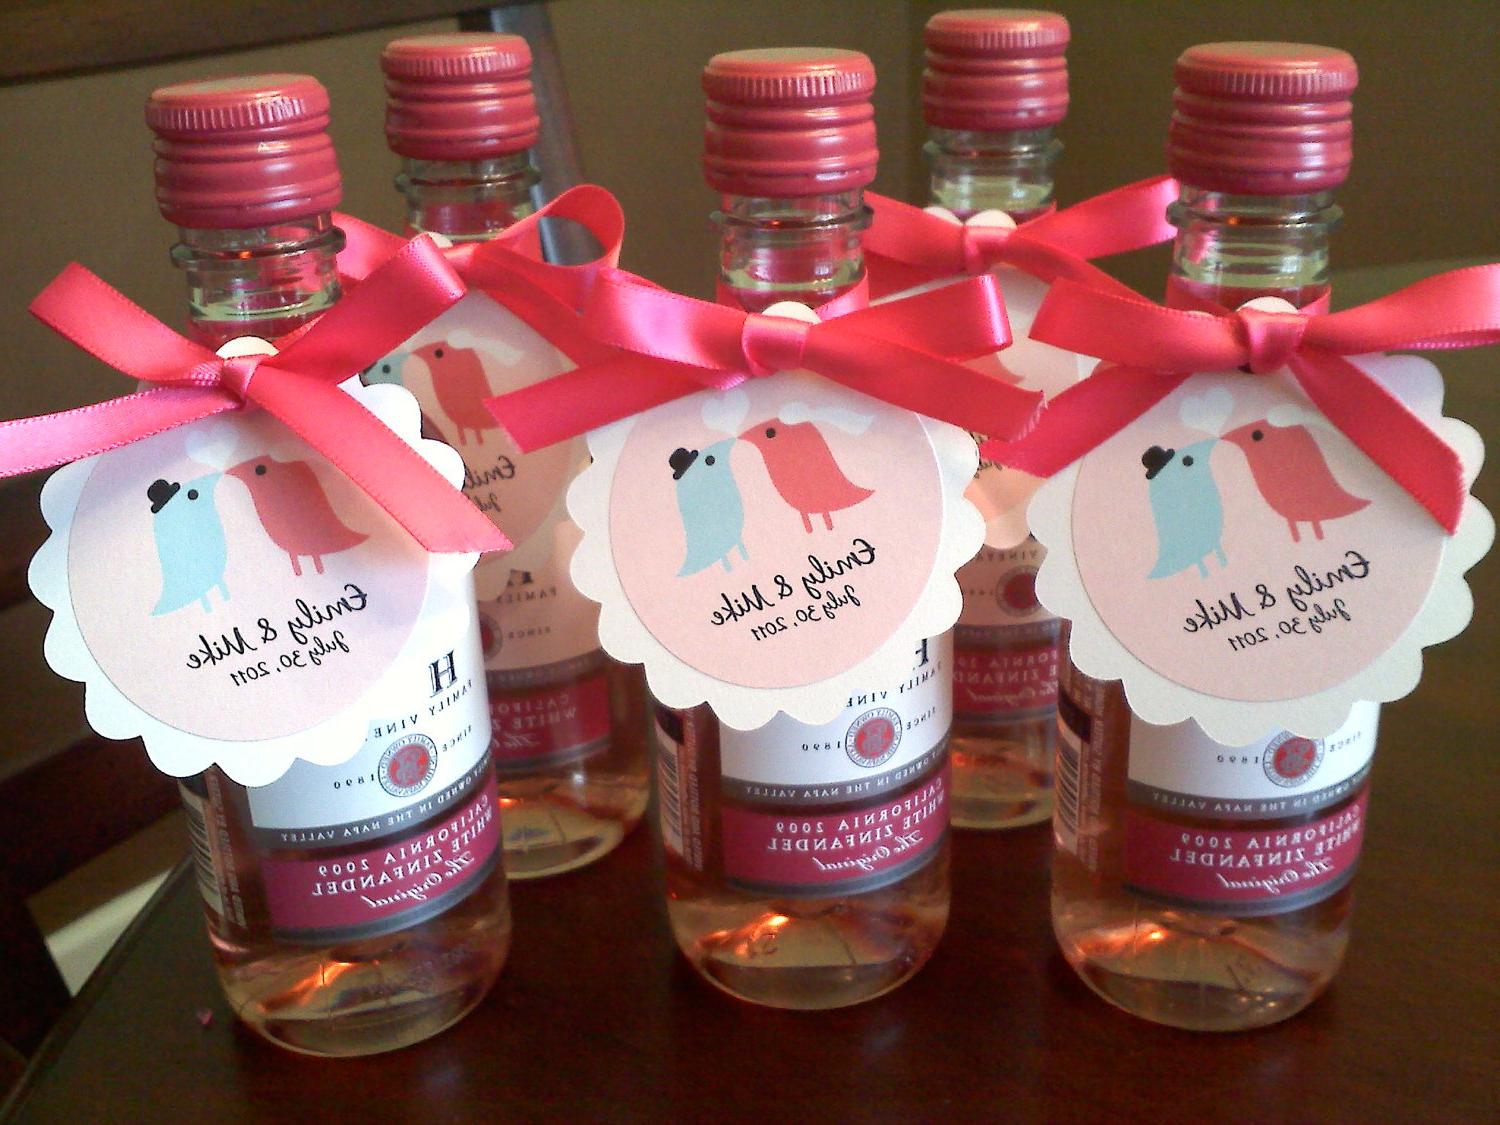 for her wedding favors.